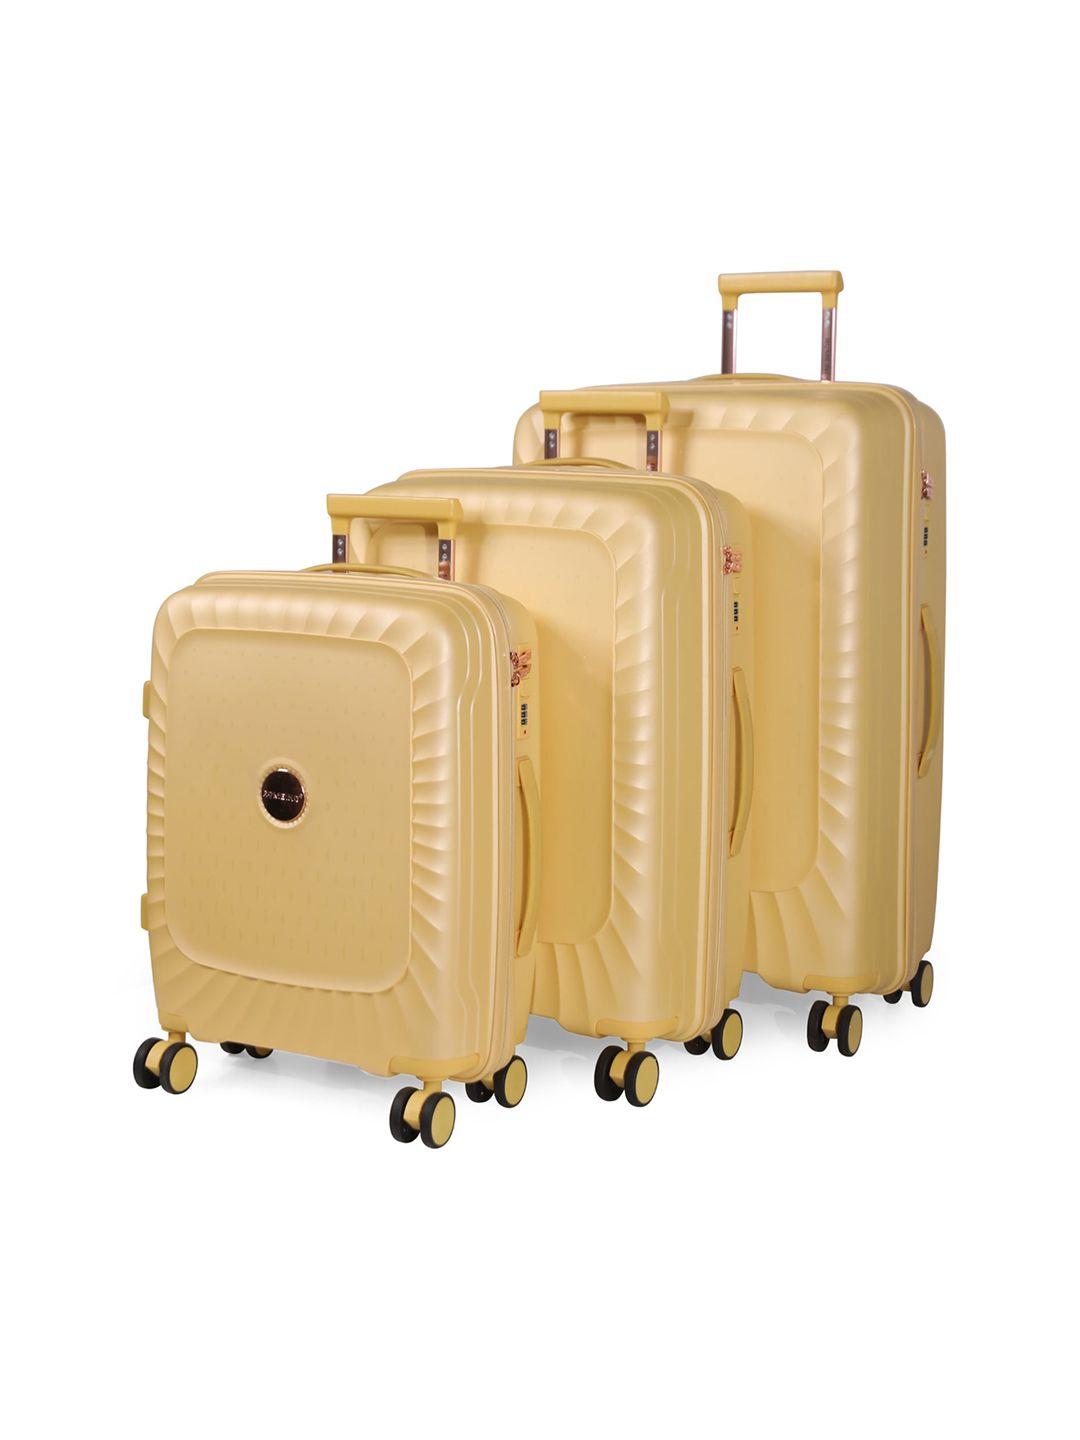 romeing set of 3 sicily textured hard-sided 360-degree rotation trolley suitcase